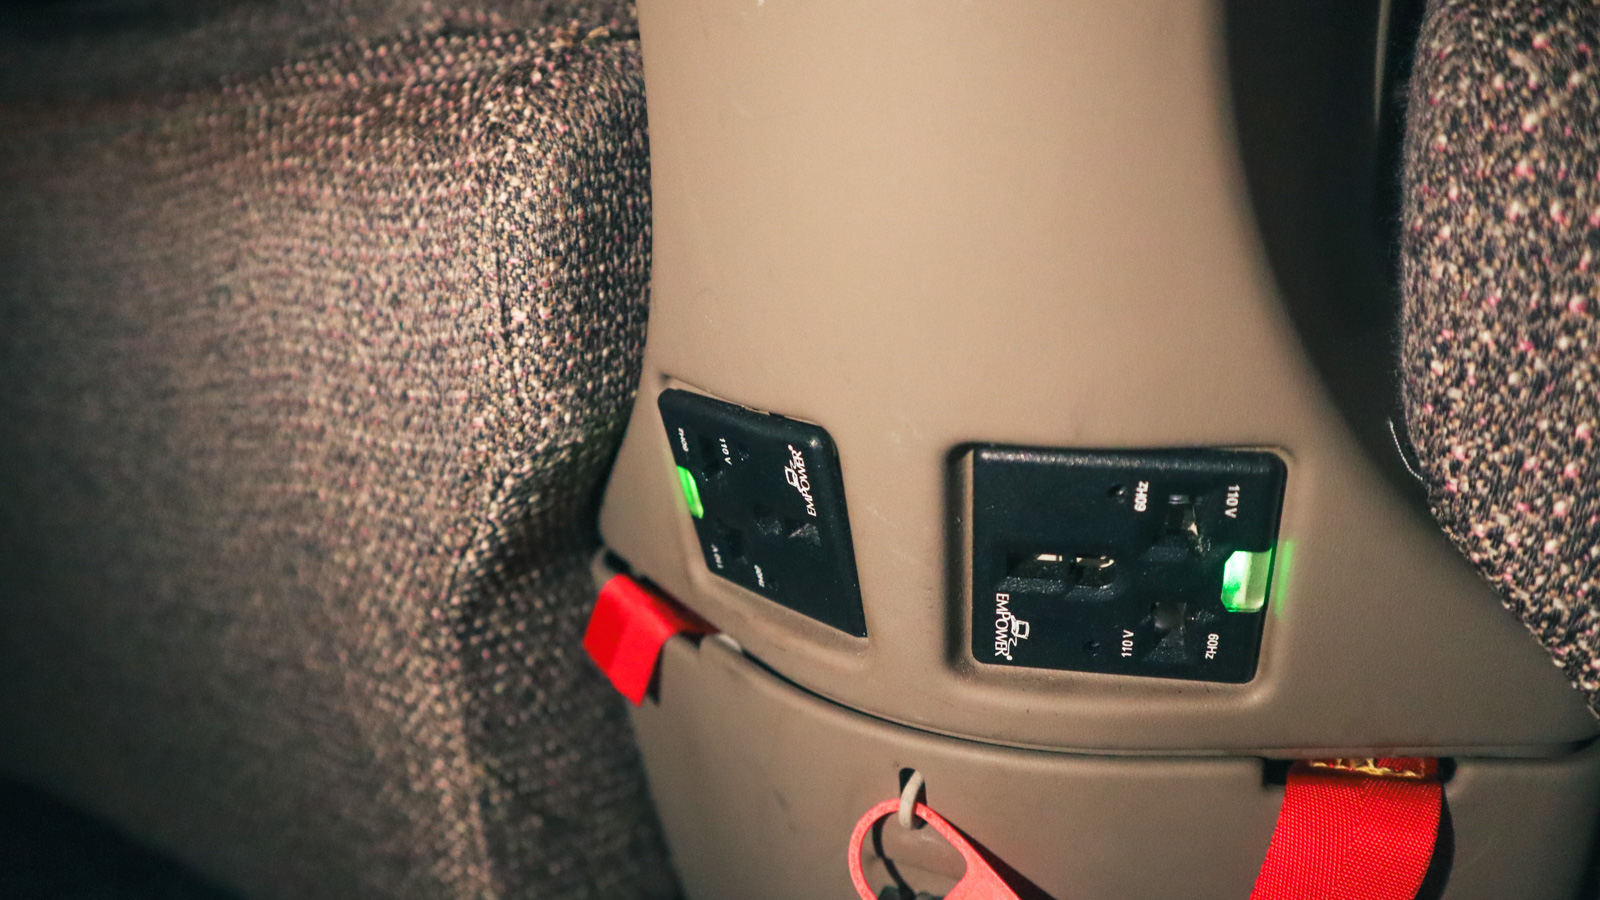 Power sockets China Airlines A350 Premium Economy